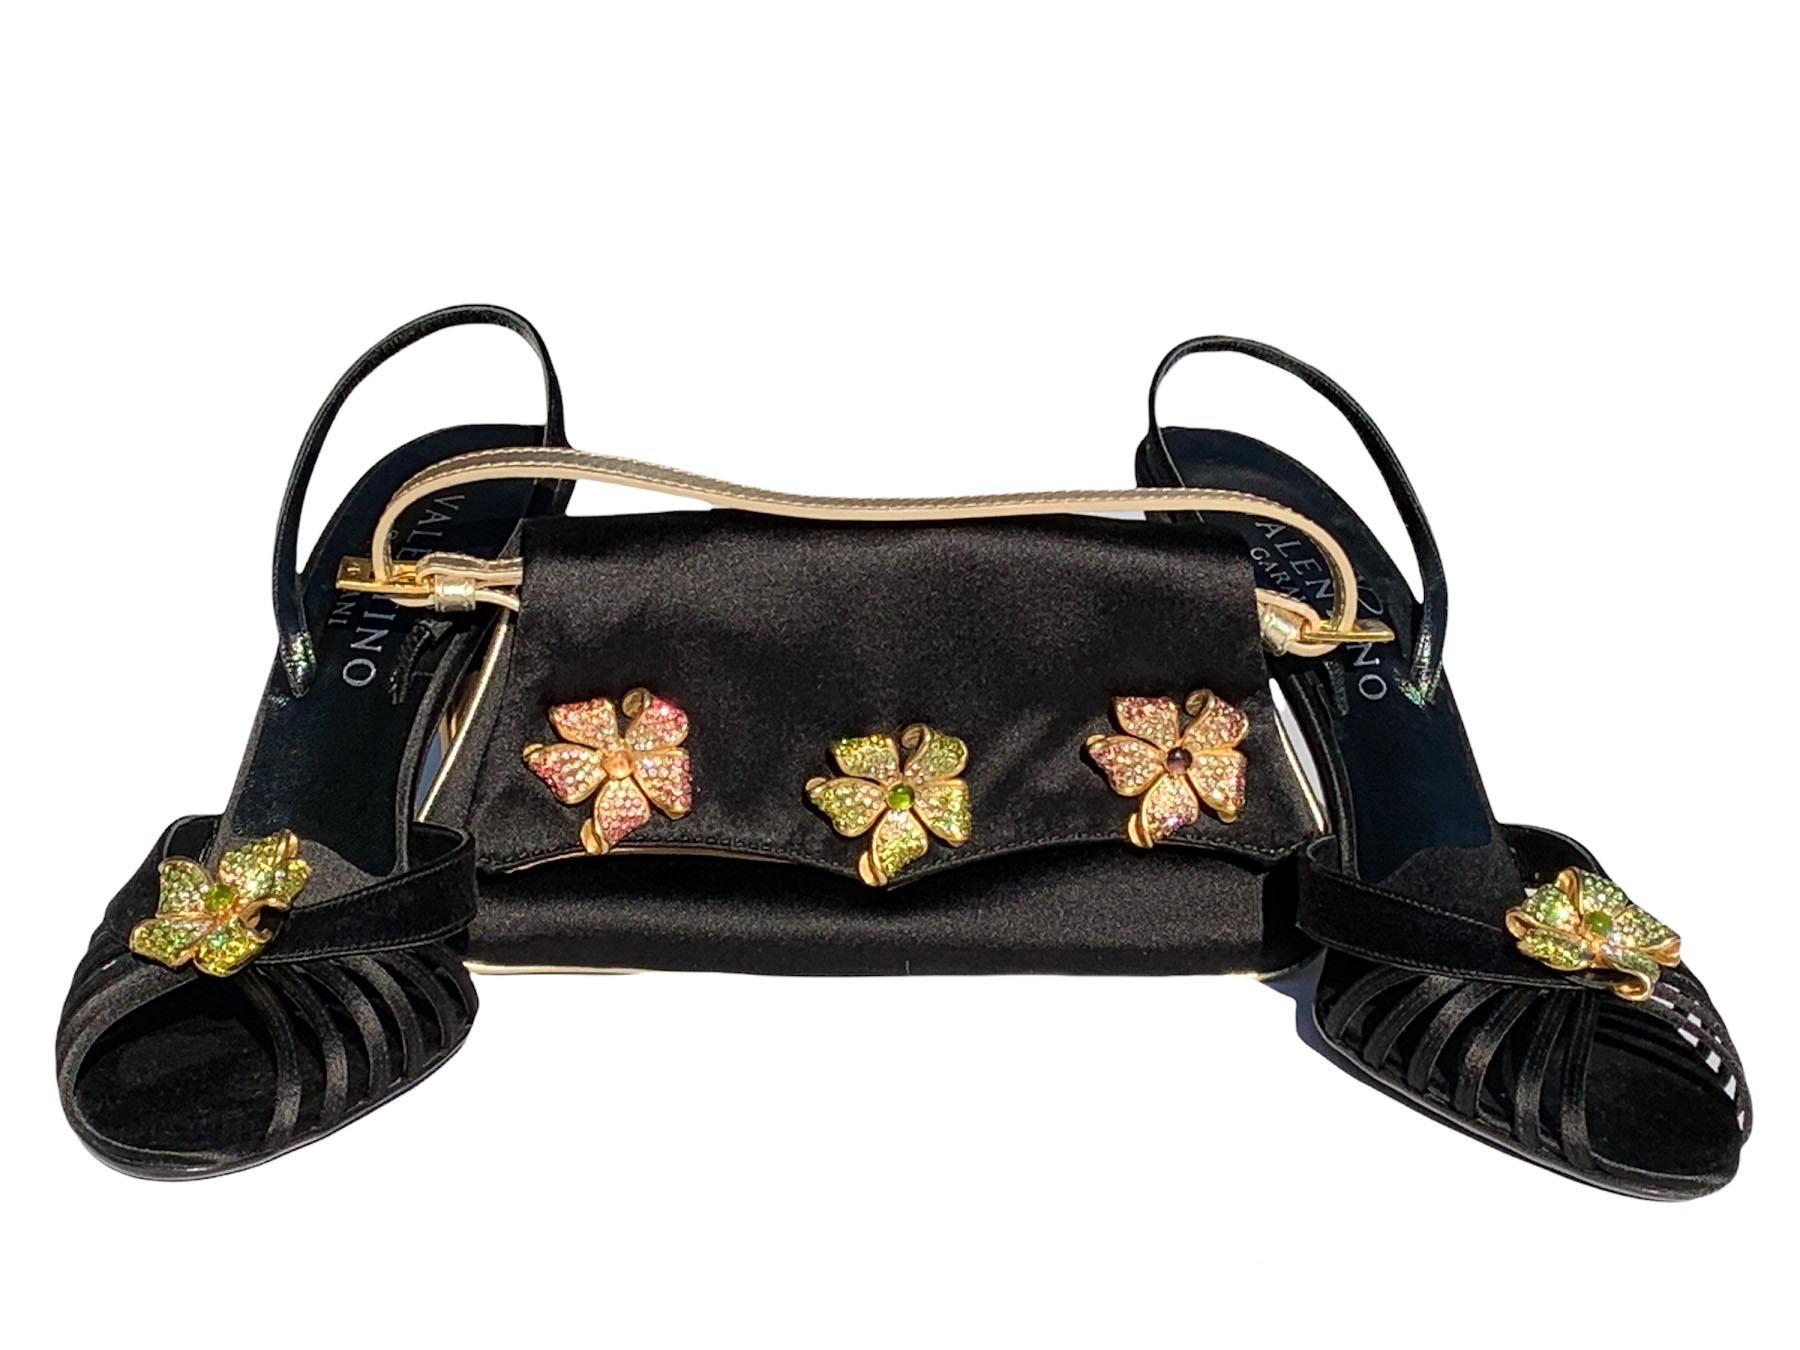 New Valentino Garavani Black Jeweled Slingback Sandals with Matching Clutch
2006 Collection
Black Satin Sandals Finished with Gold Tone Metal Flower Full of Green Crystals, Heel Height - 4 inches.
Black Satin Matching Clutch Finished with Gold Tone